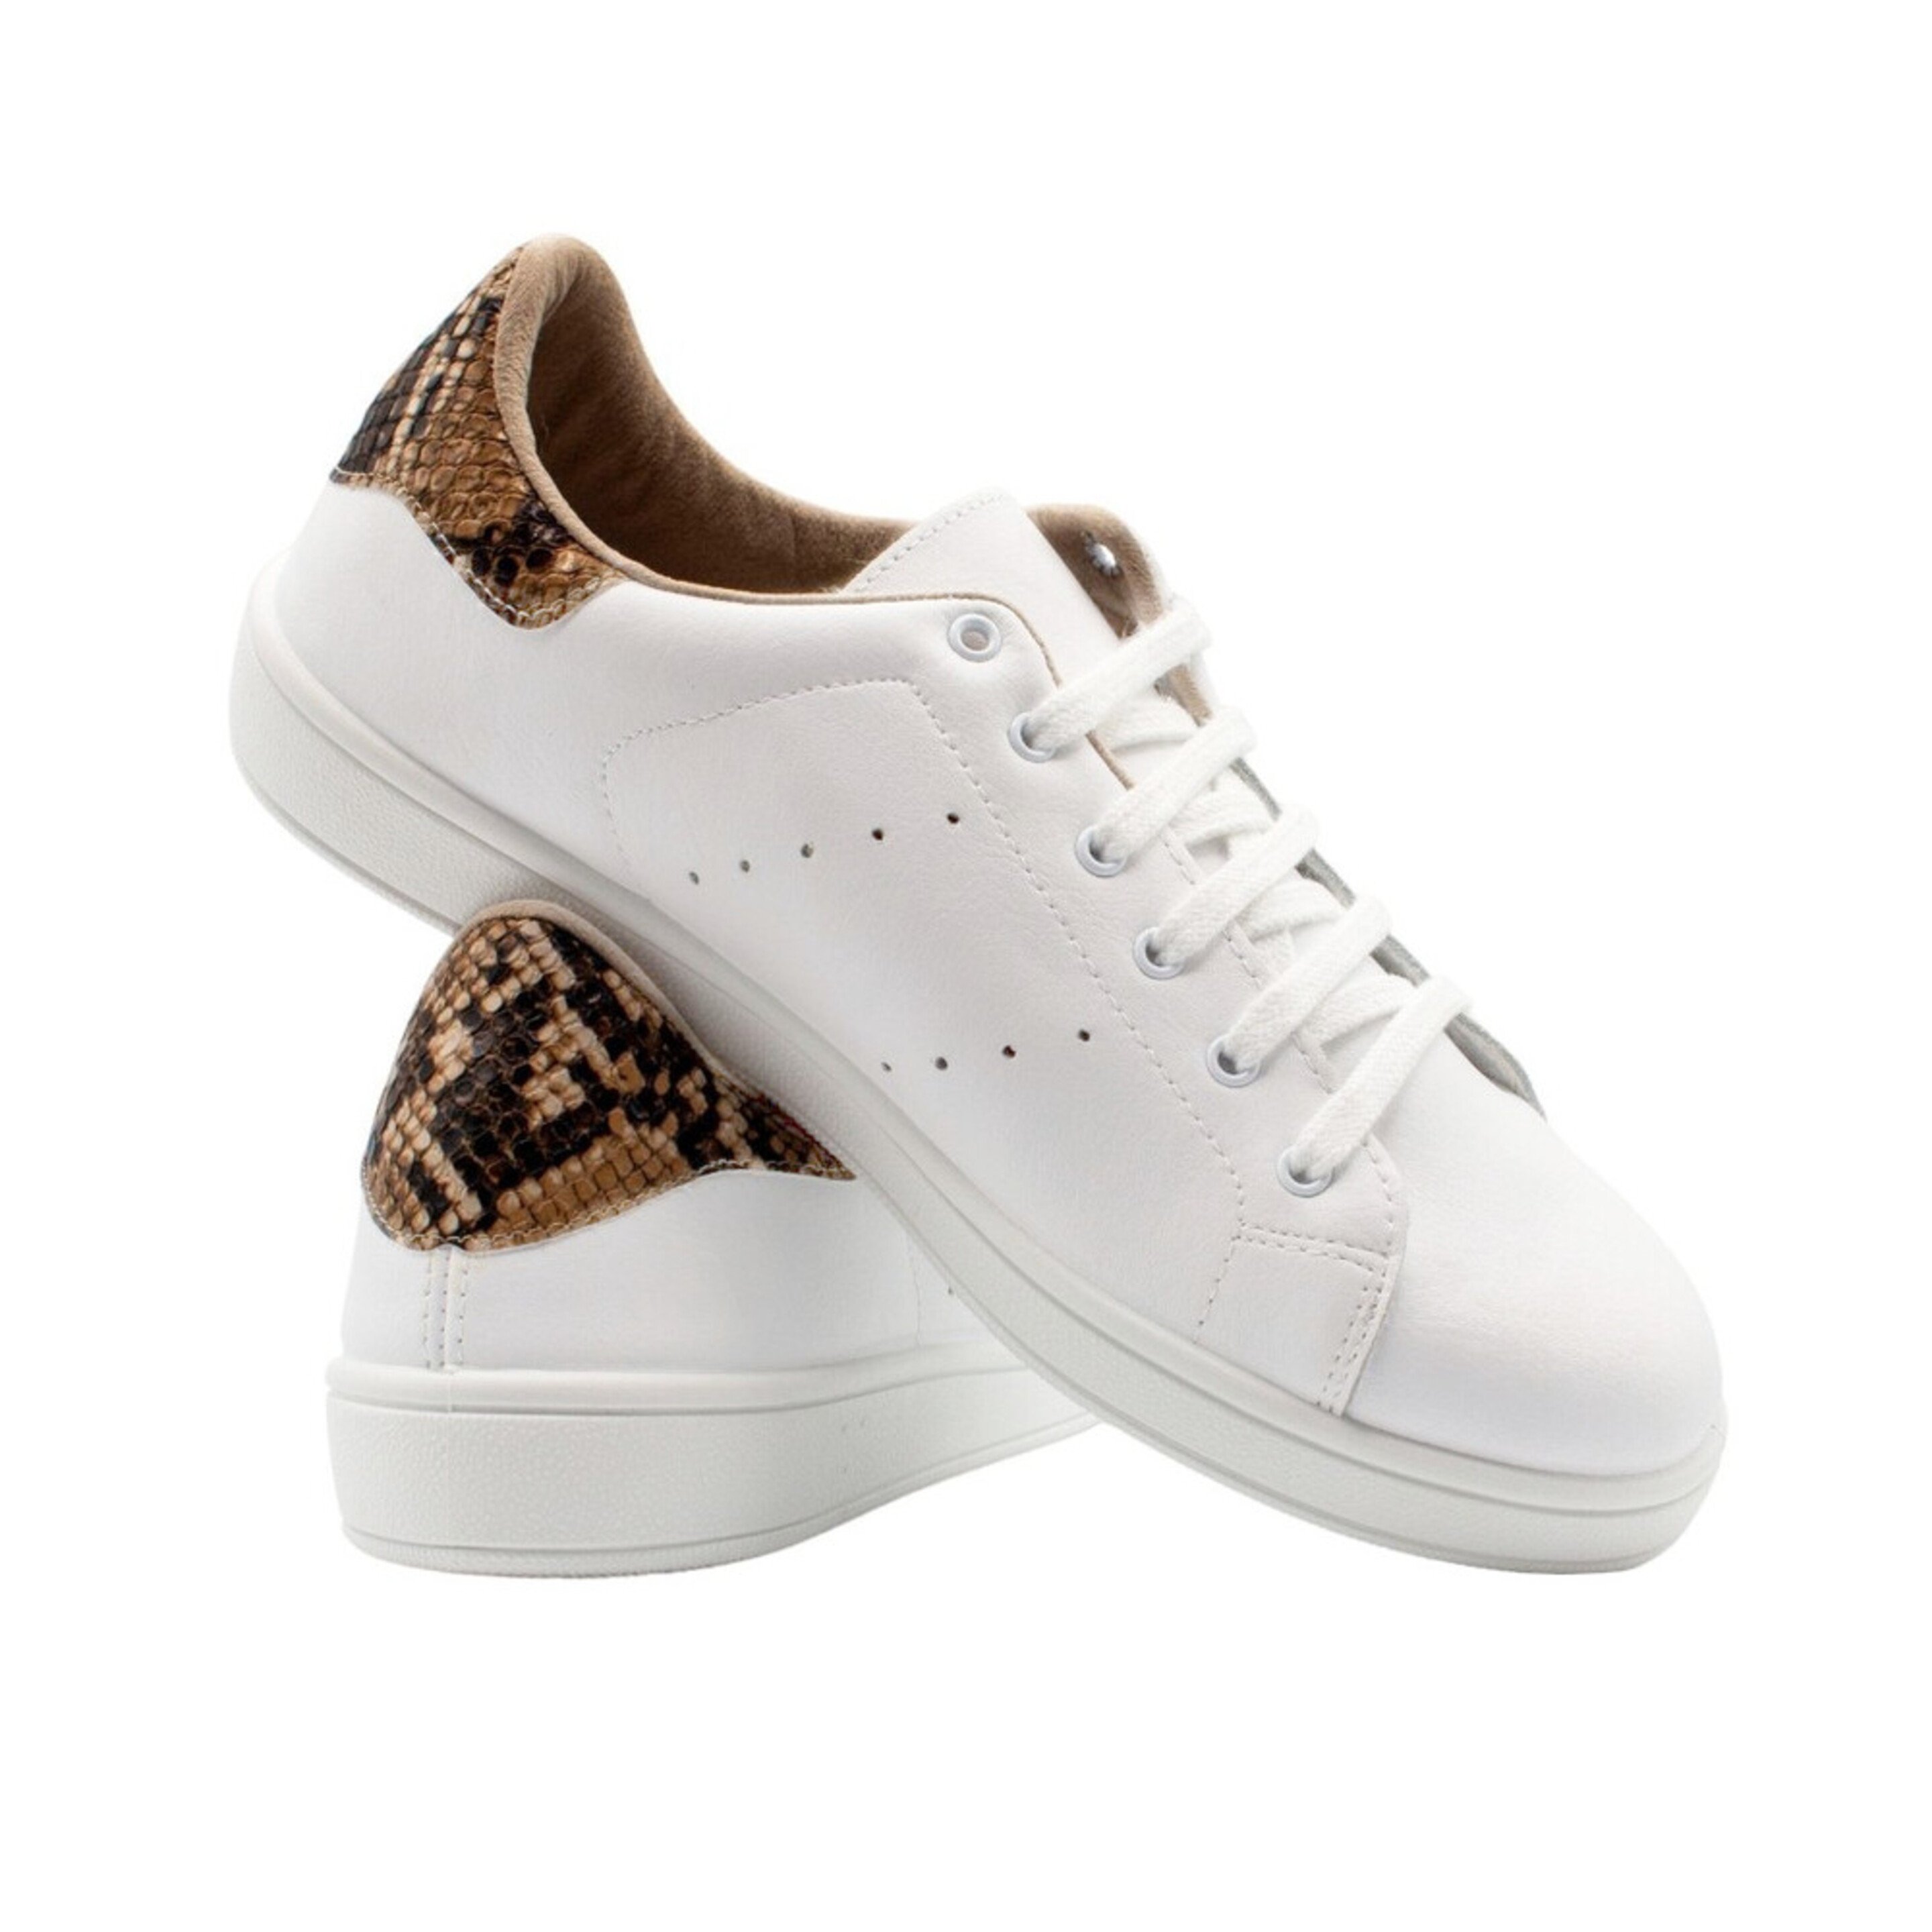 Sneaker Owlet Shoes Python